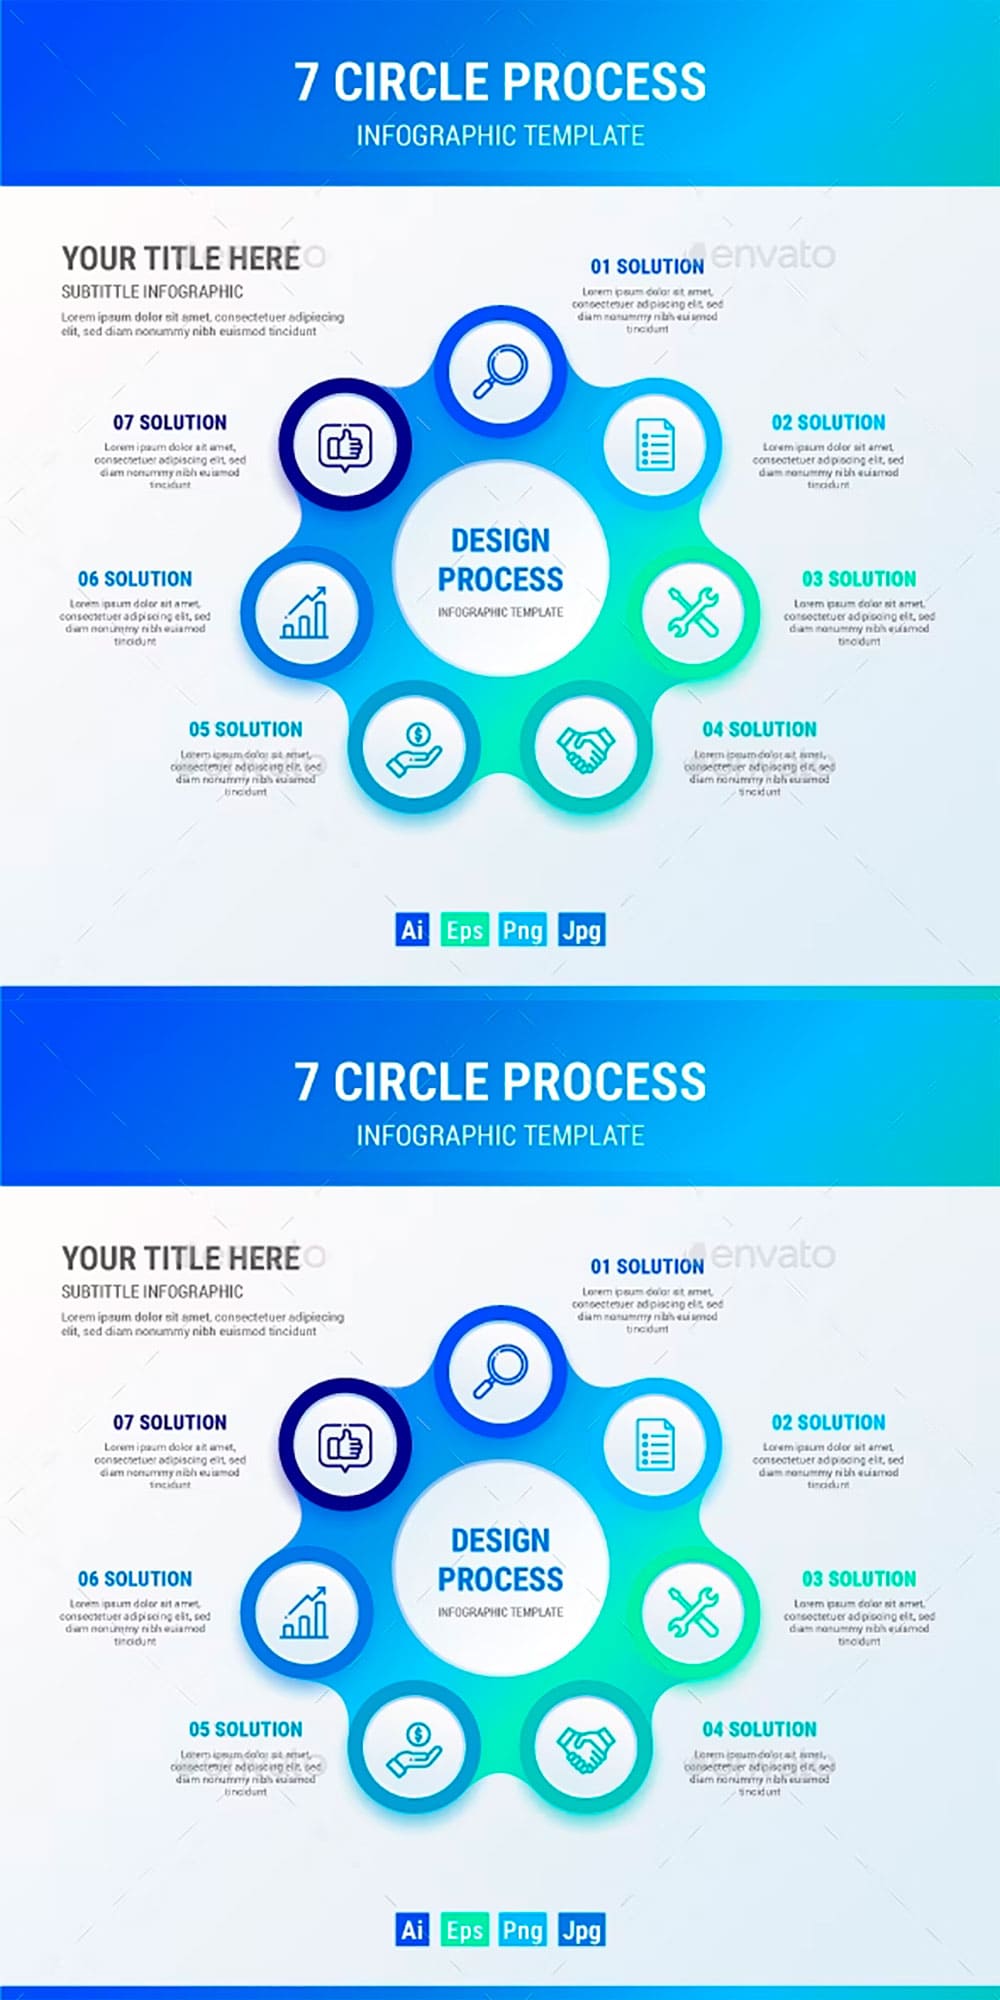 7 circle process infographic, picture for pinterest.